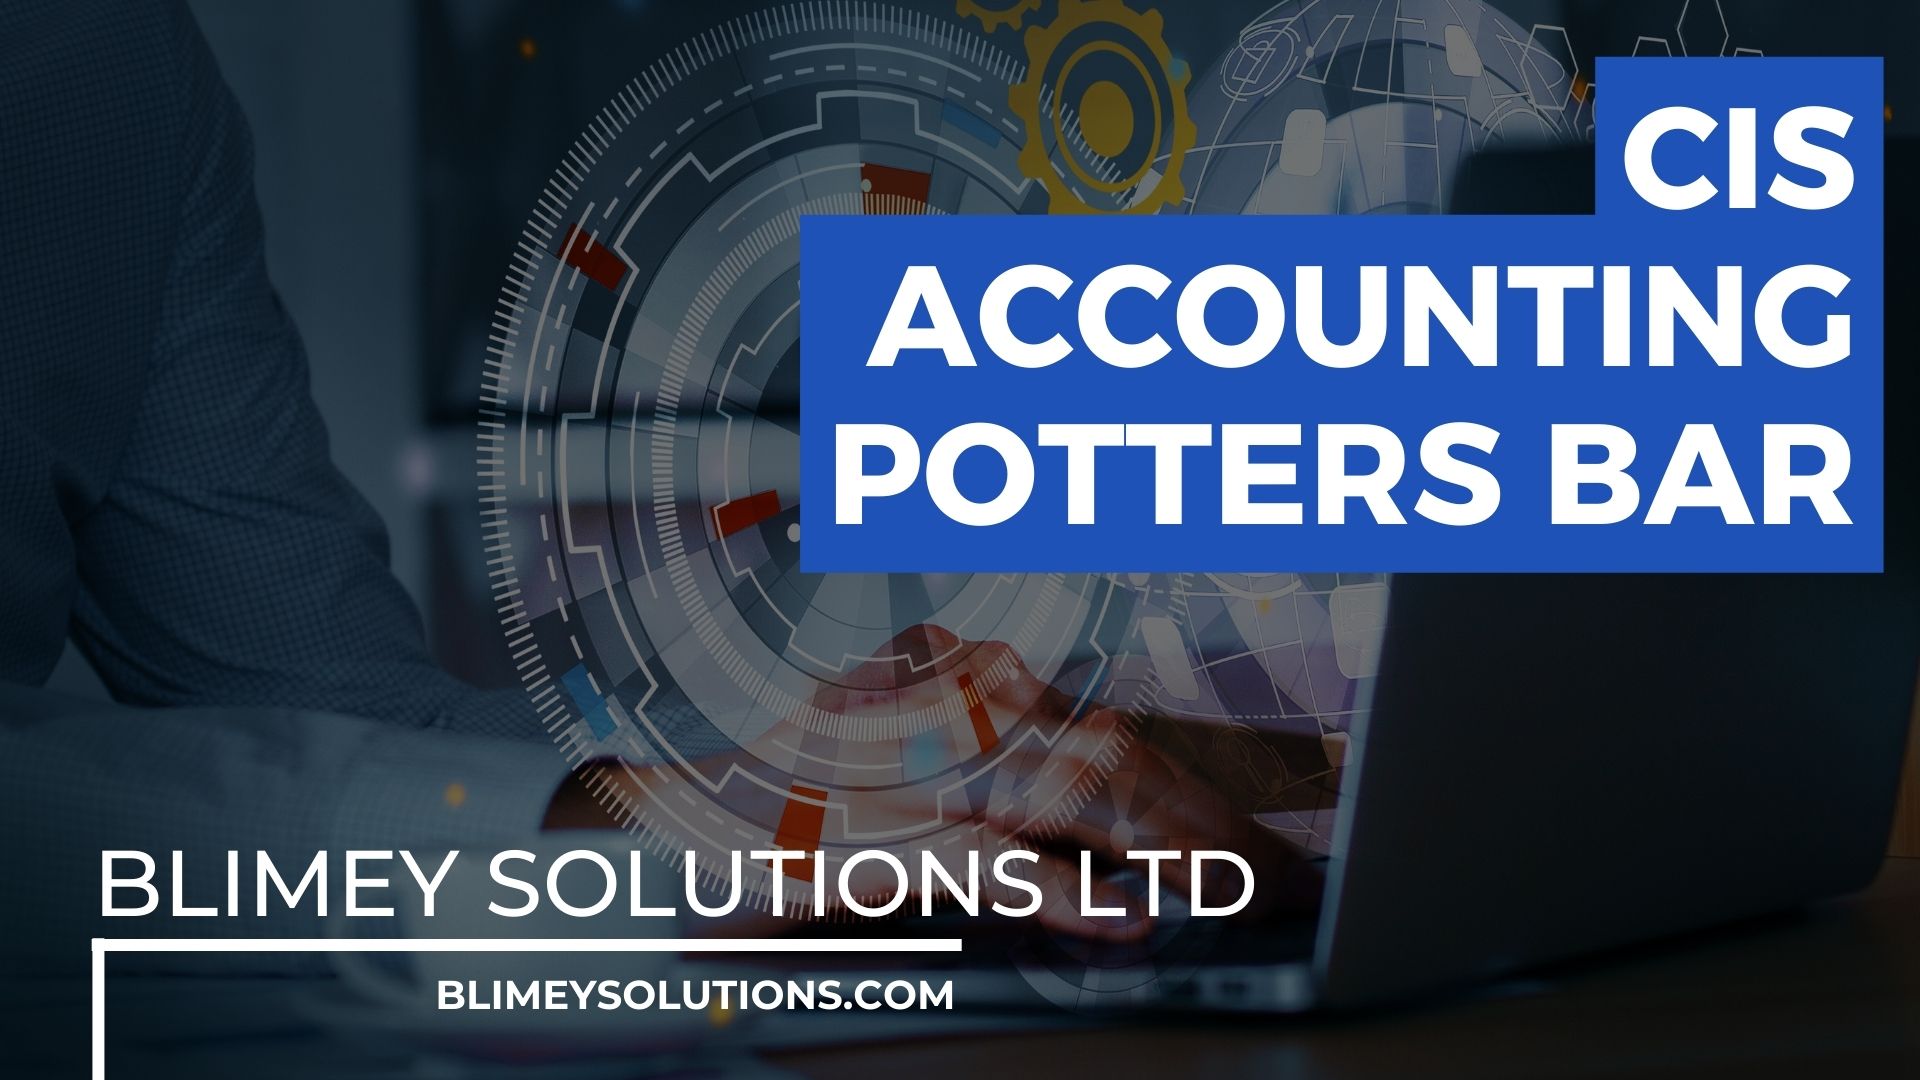 Cis Accounting In Potters Bar En6 London